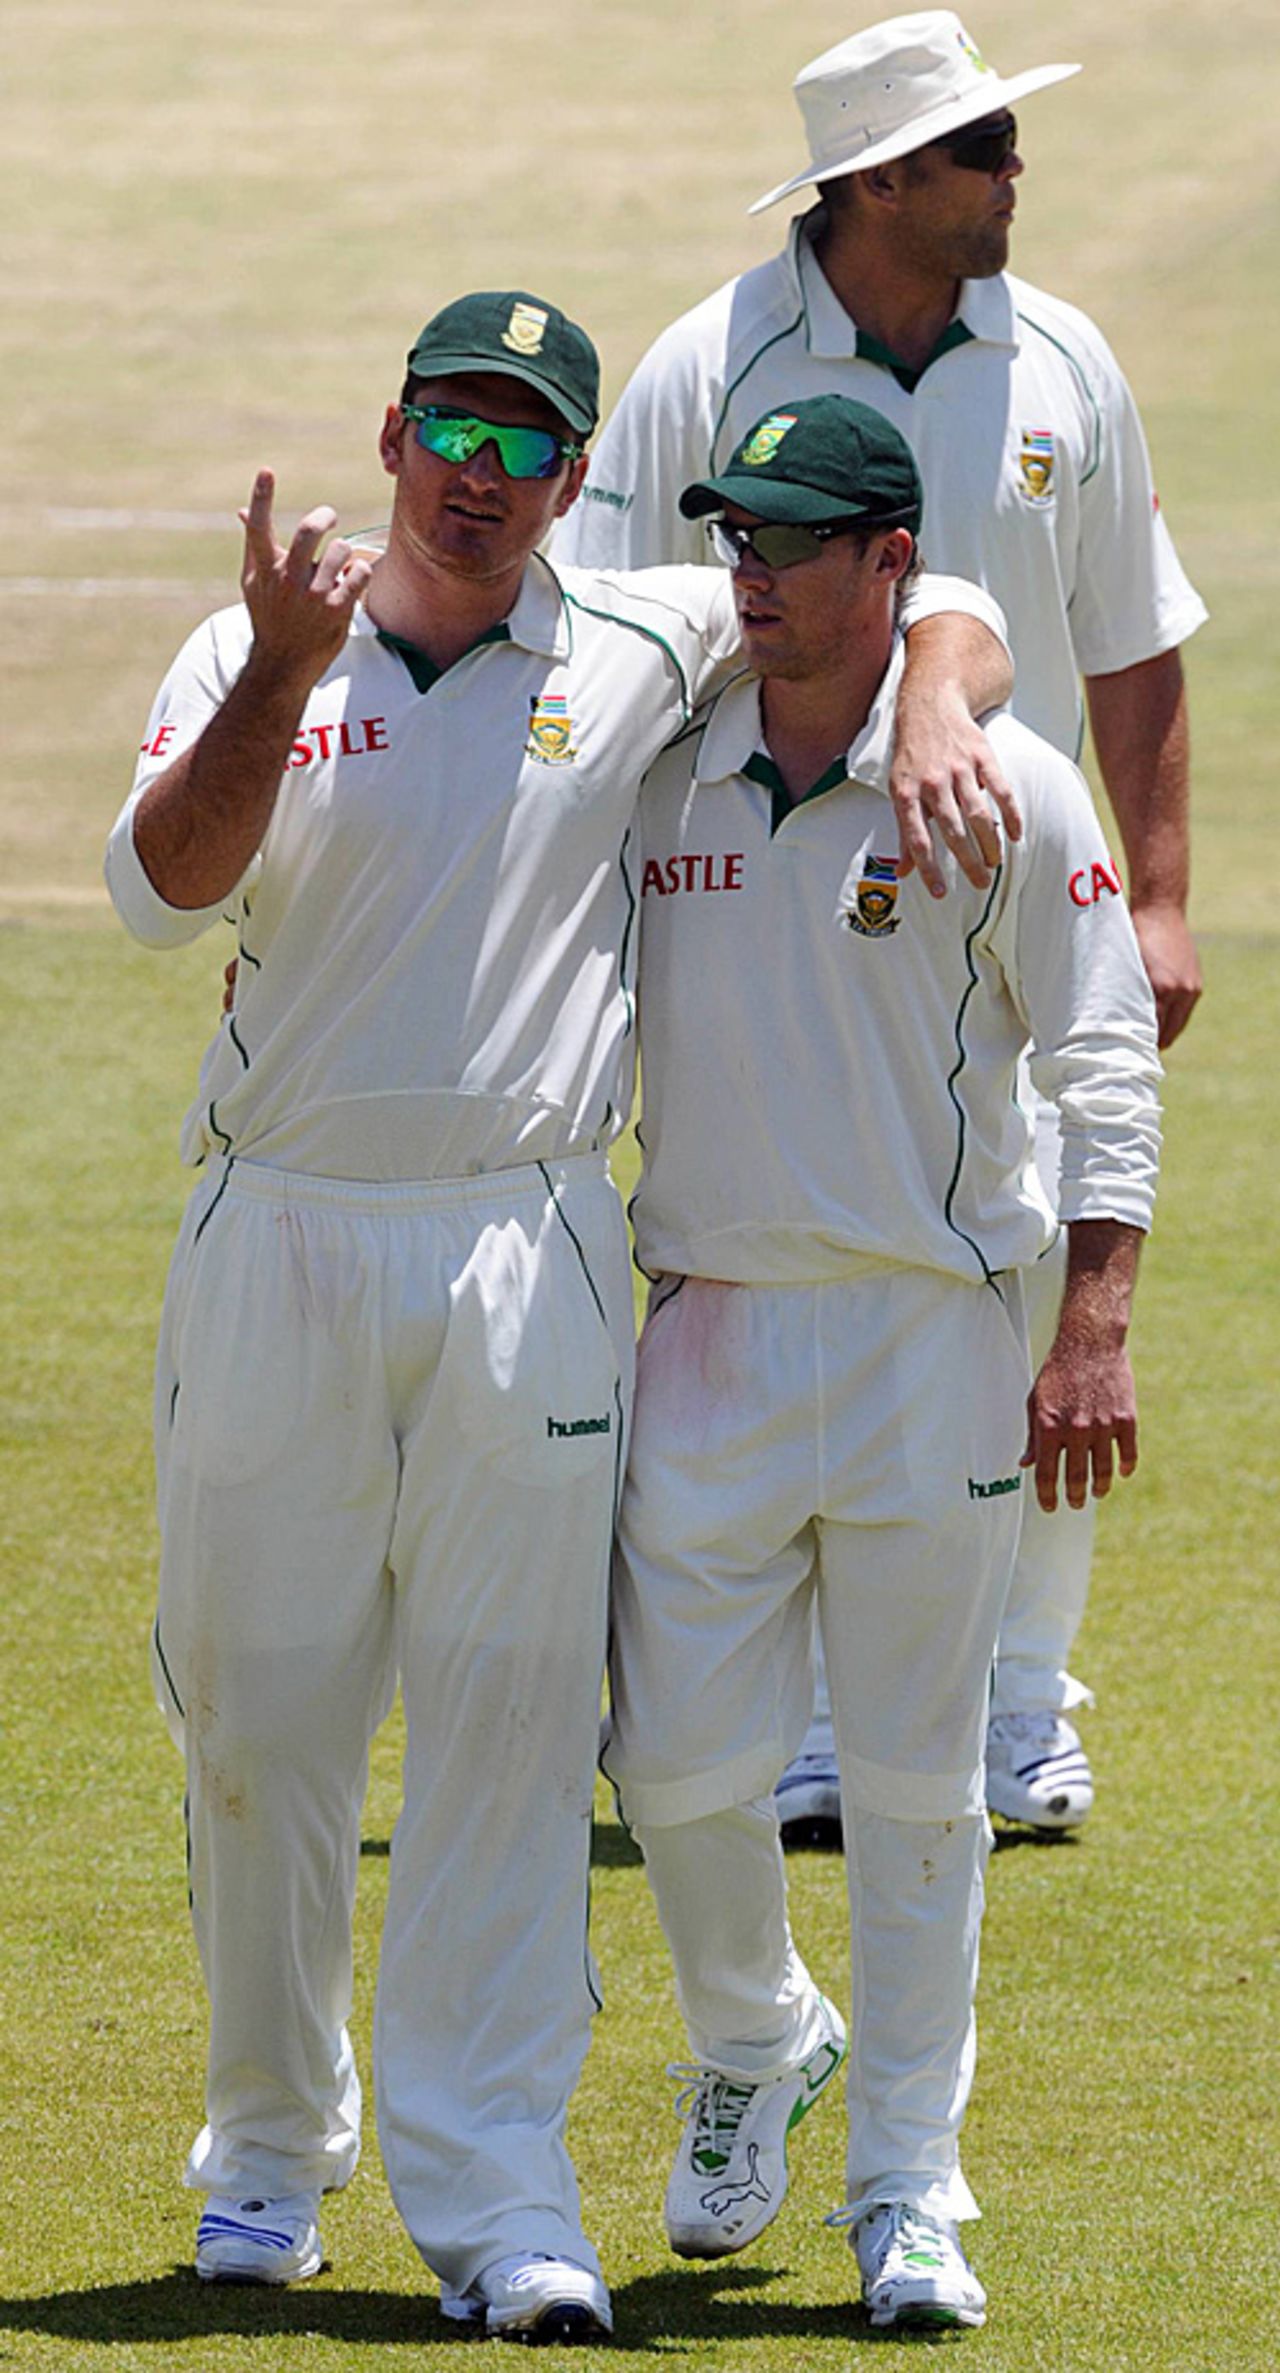 Graeme Smith and AB de Villiers celebrate South Africa's victory, South Africa v Bangladesh, 1st Test, Bloemfontein, November 22, 2008